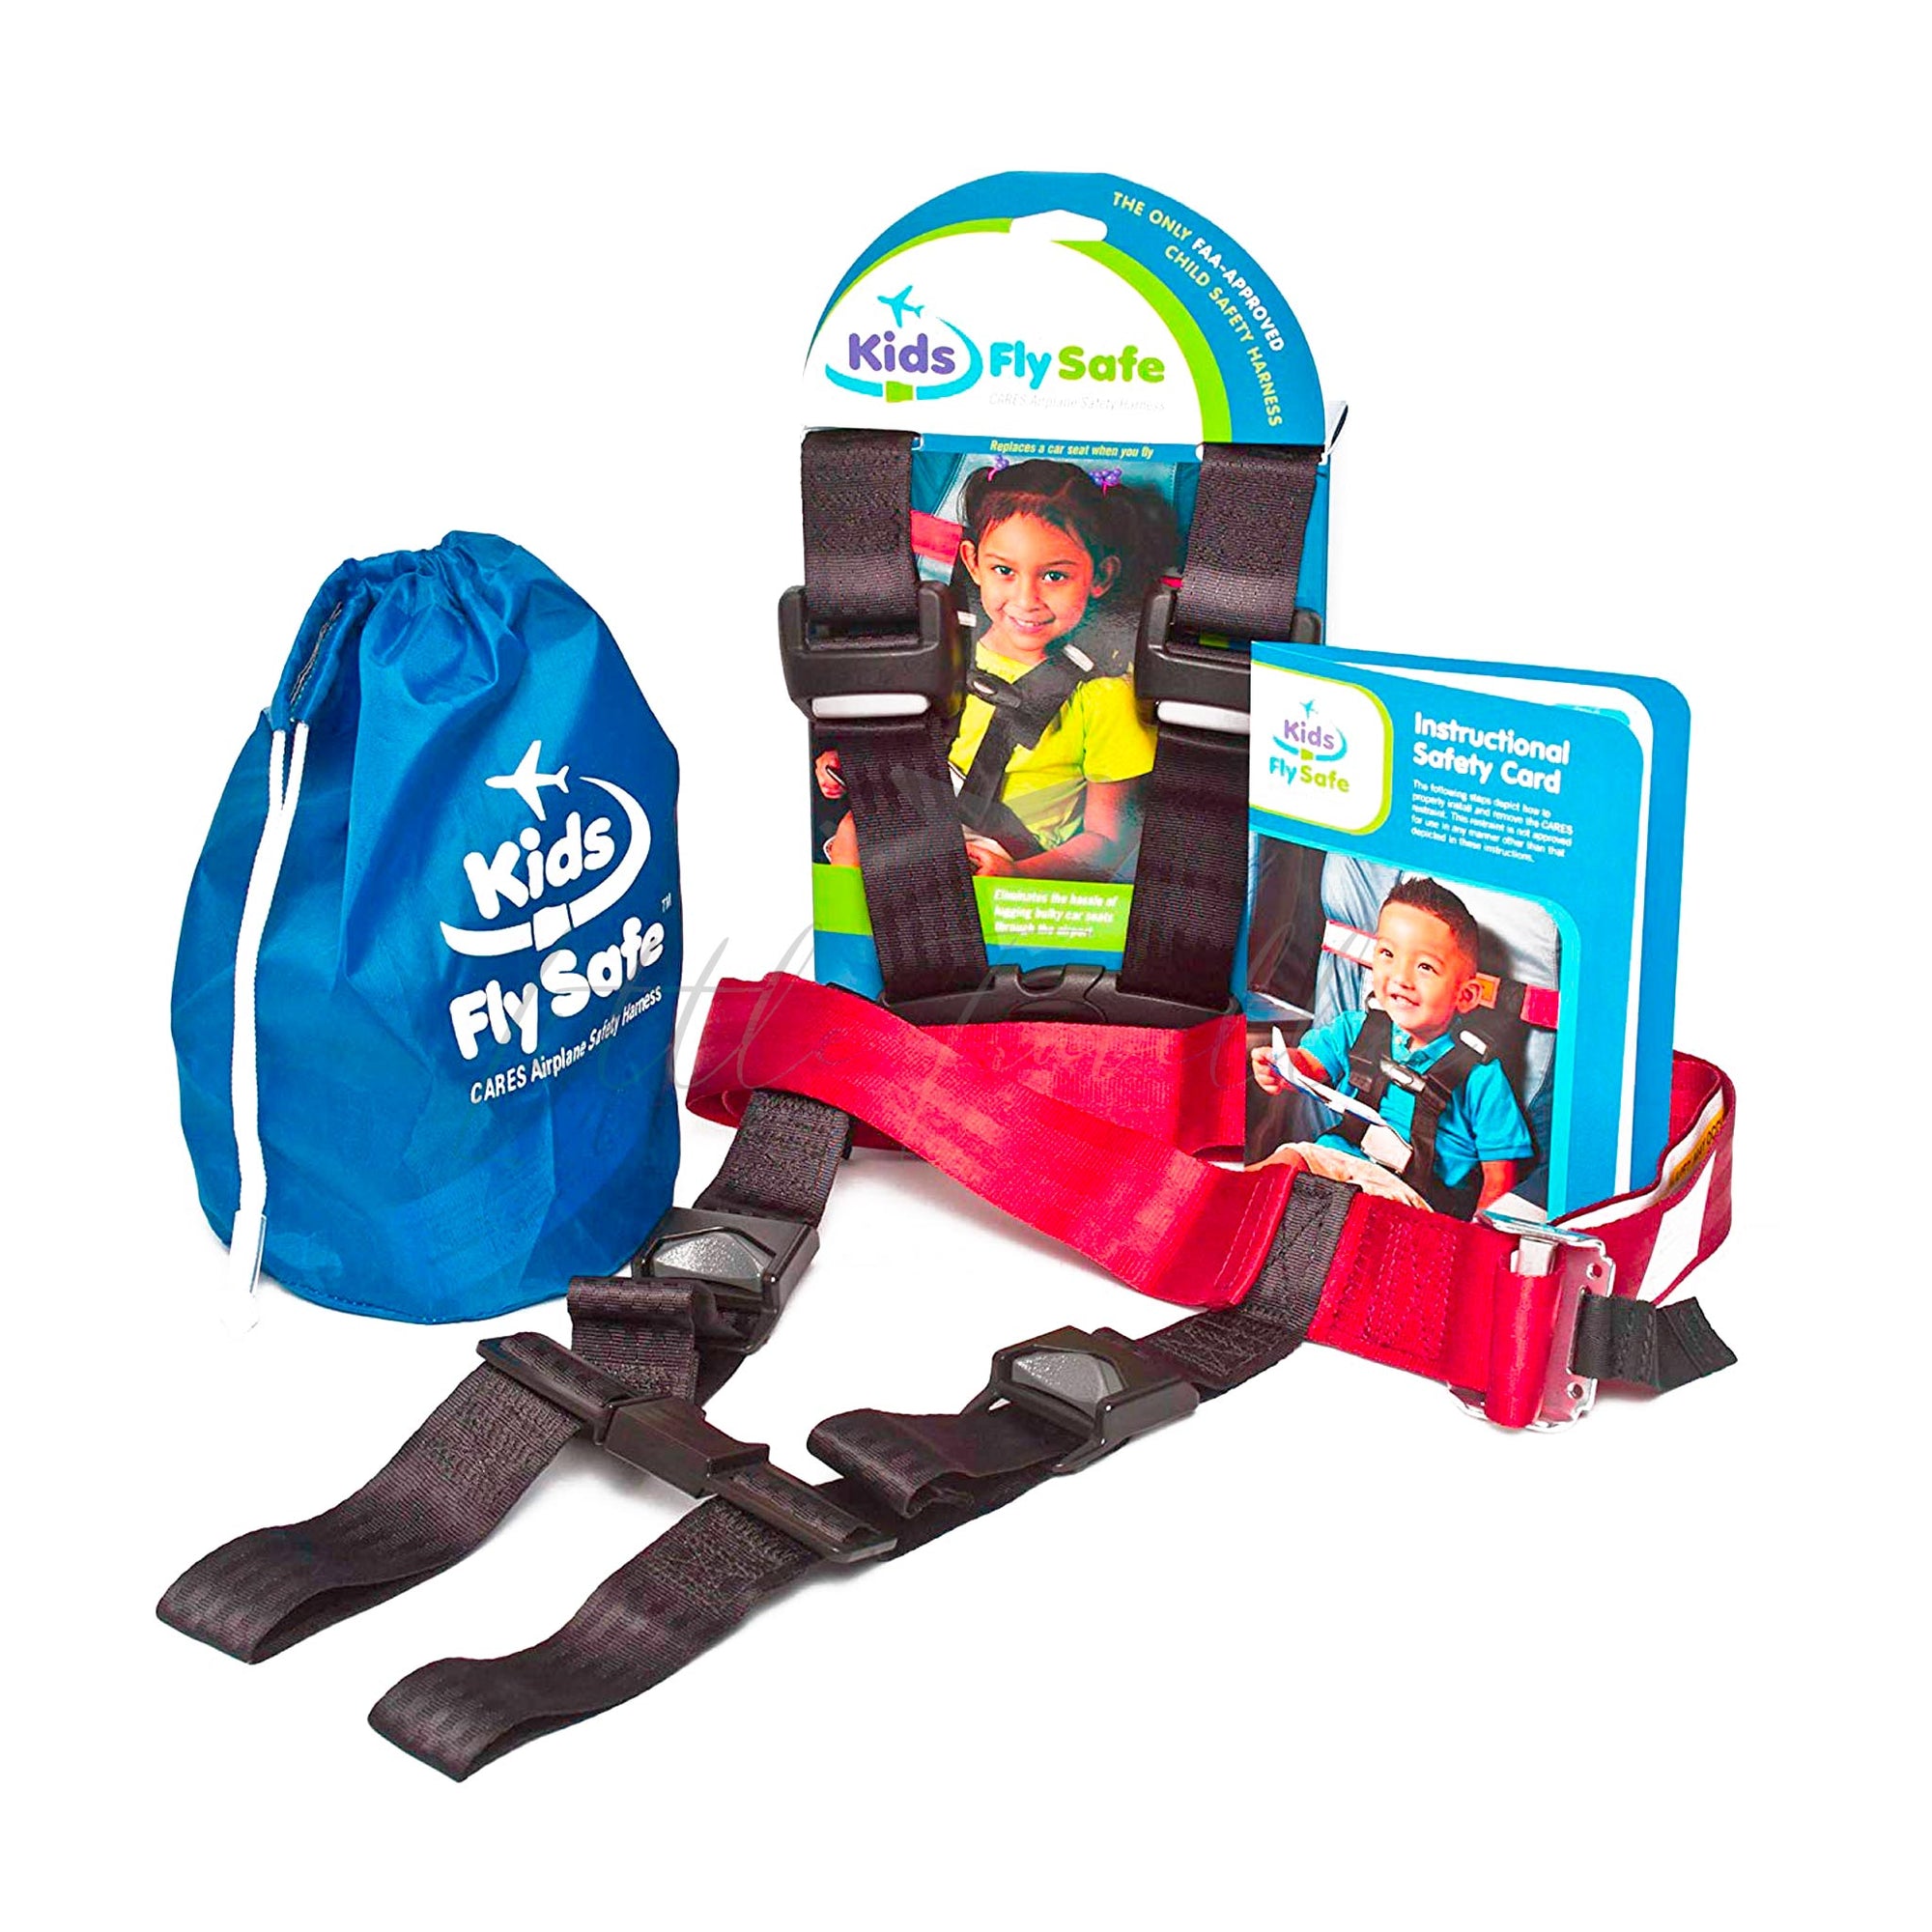 AmSafe CARES Kids Fly Safe Airplane Seat Harness for Children